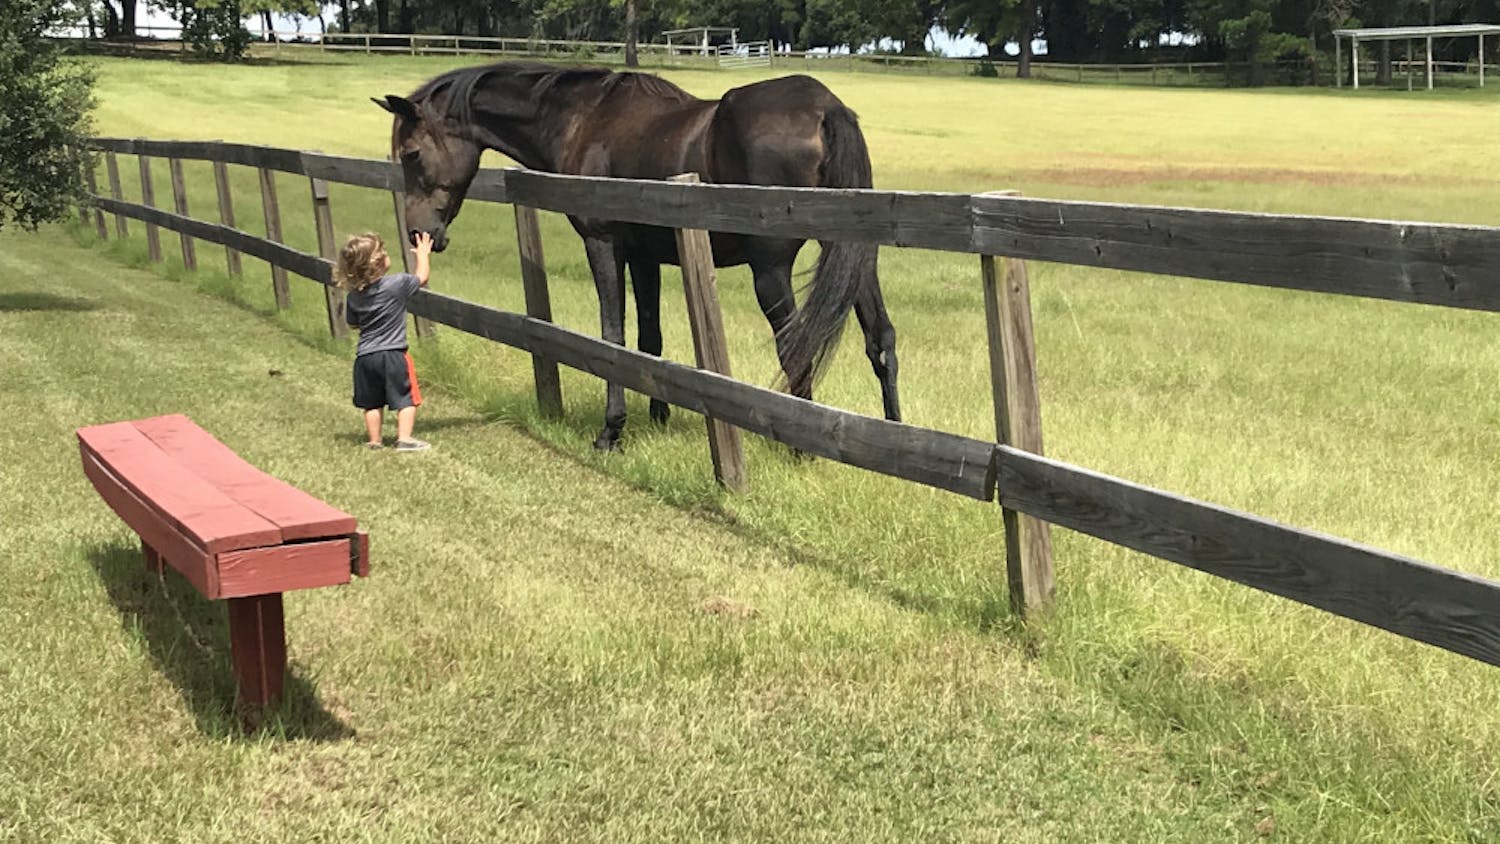 A young boy, Liam, and a horse become friendly, as he pets the horse’s nose. Liam’s family, meanwhile, has the attention of another horse nearby.